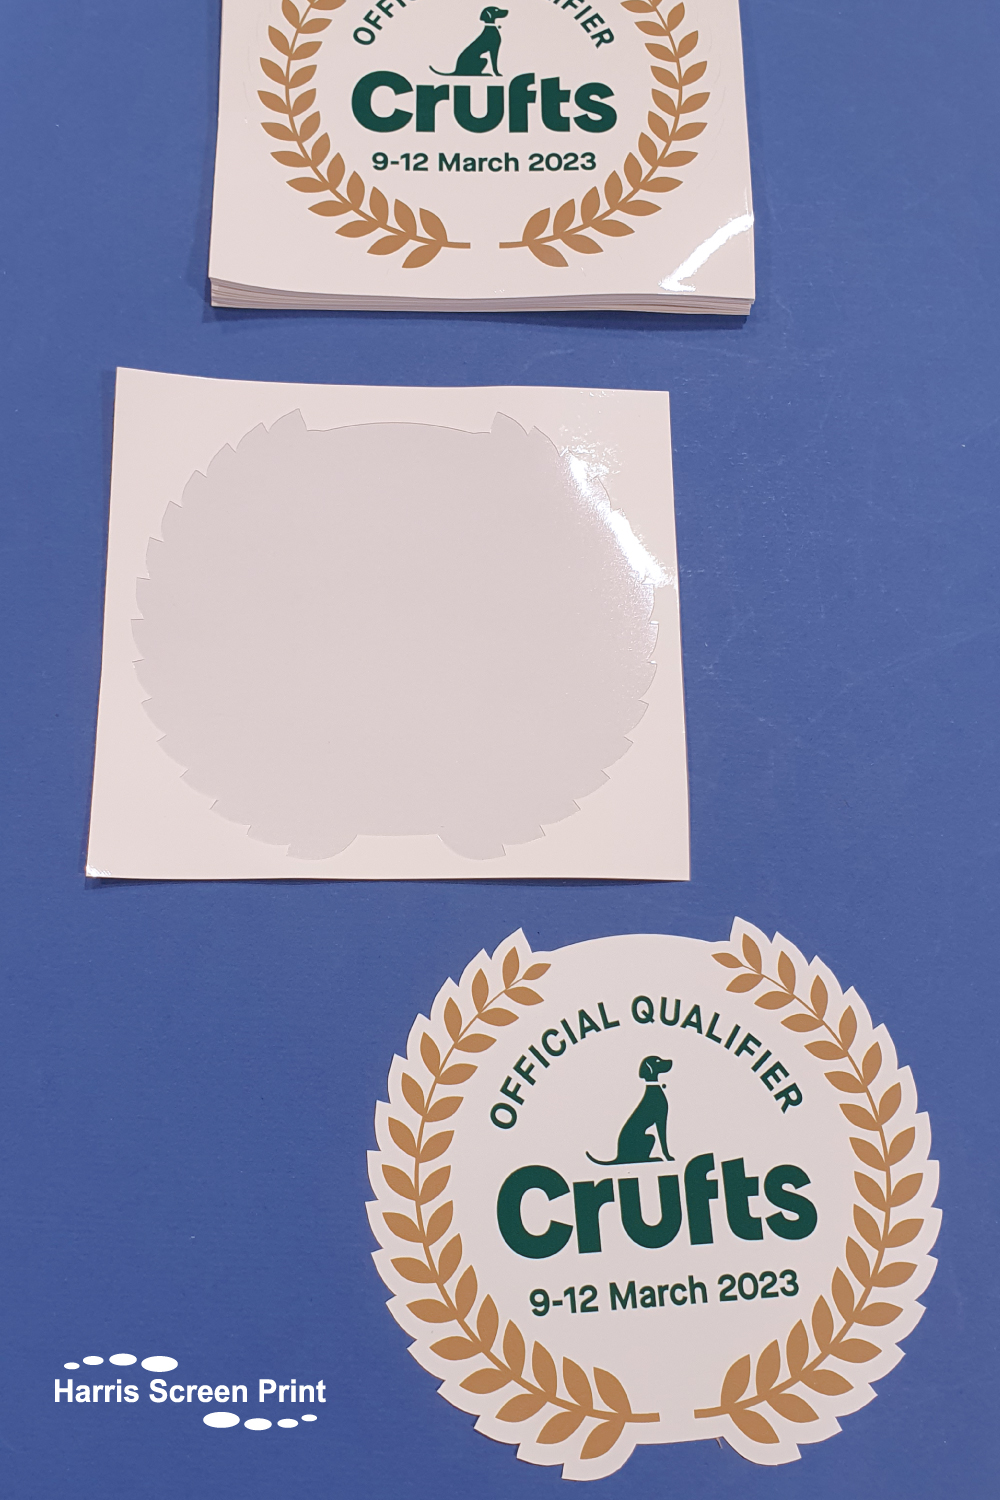 Official Crufts 2023 Qualifiers car window stickers printed